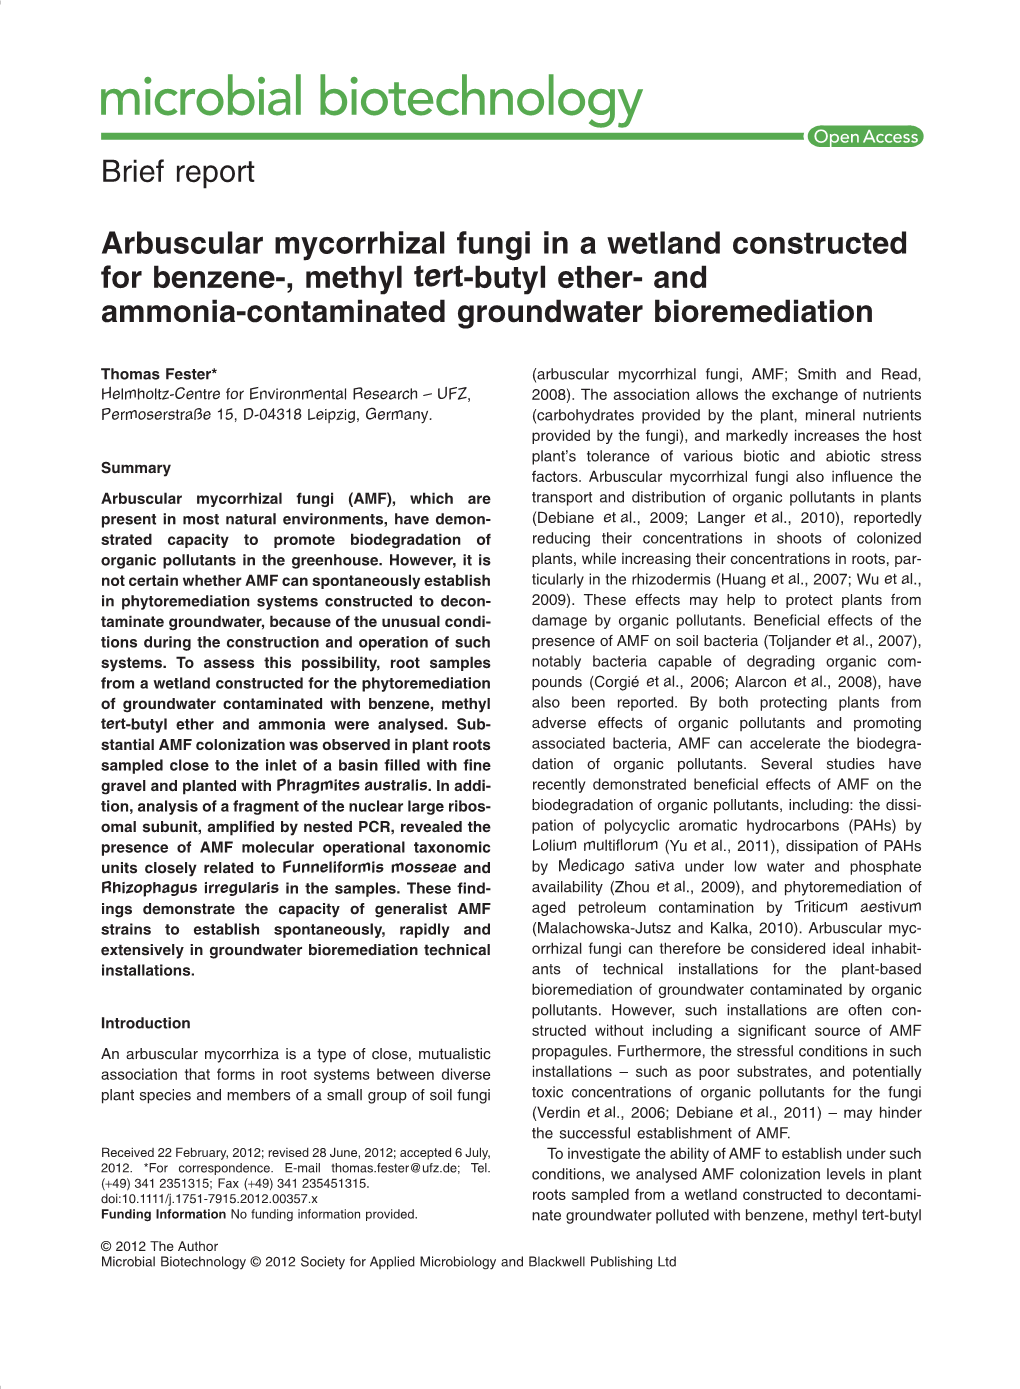 Arbuscular Mycorrhizal Fungi in a Wetland Constructed for Benzene-, Methyl Tert-Butyl Ether- and Ammonia-Contaminated Groundwater Bioremediation